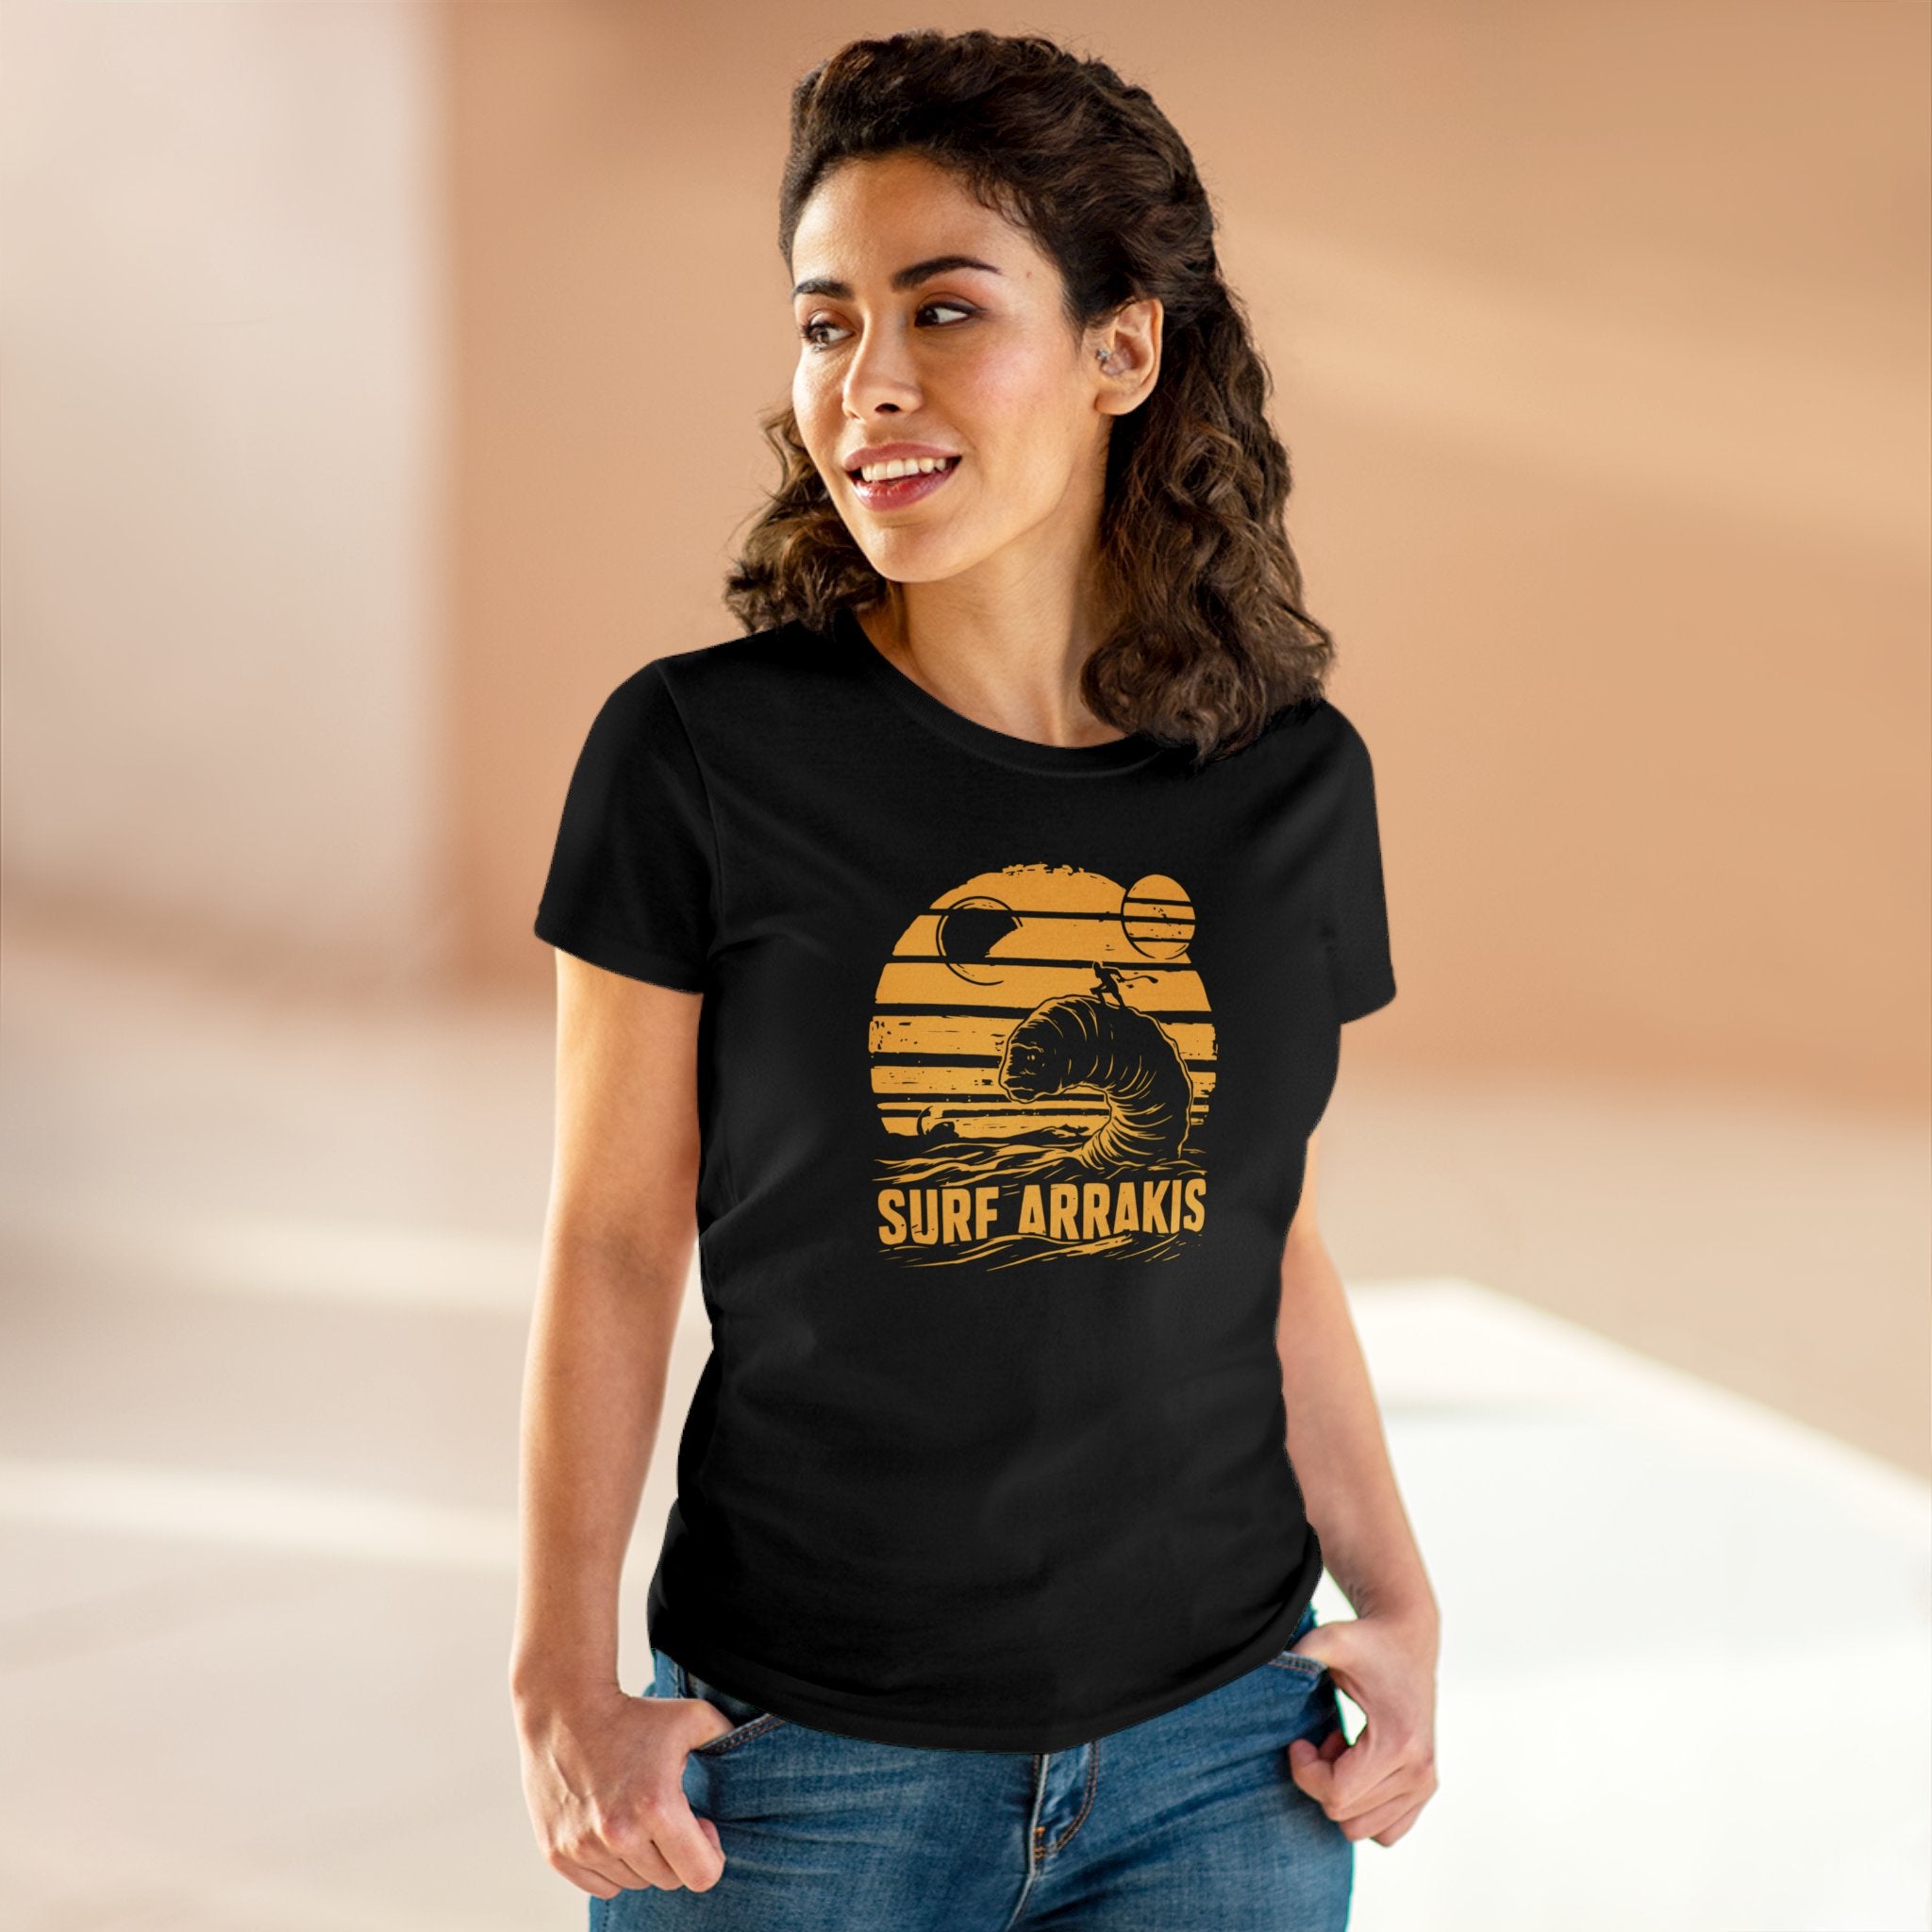 Woman wearing a Surf Arrakis - Women's Tee made of soft light cotton with a pre-shrunk comfy design. She is standing indoors, looking to the side, and has her hands in her pockets.